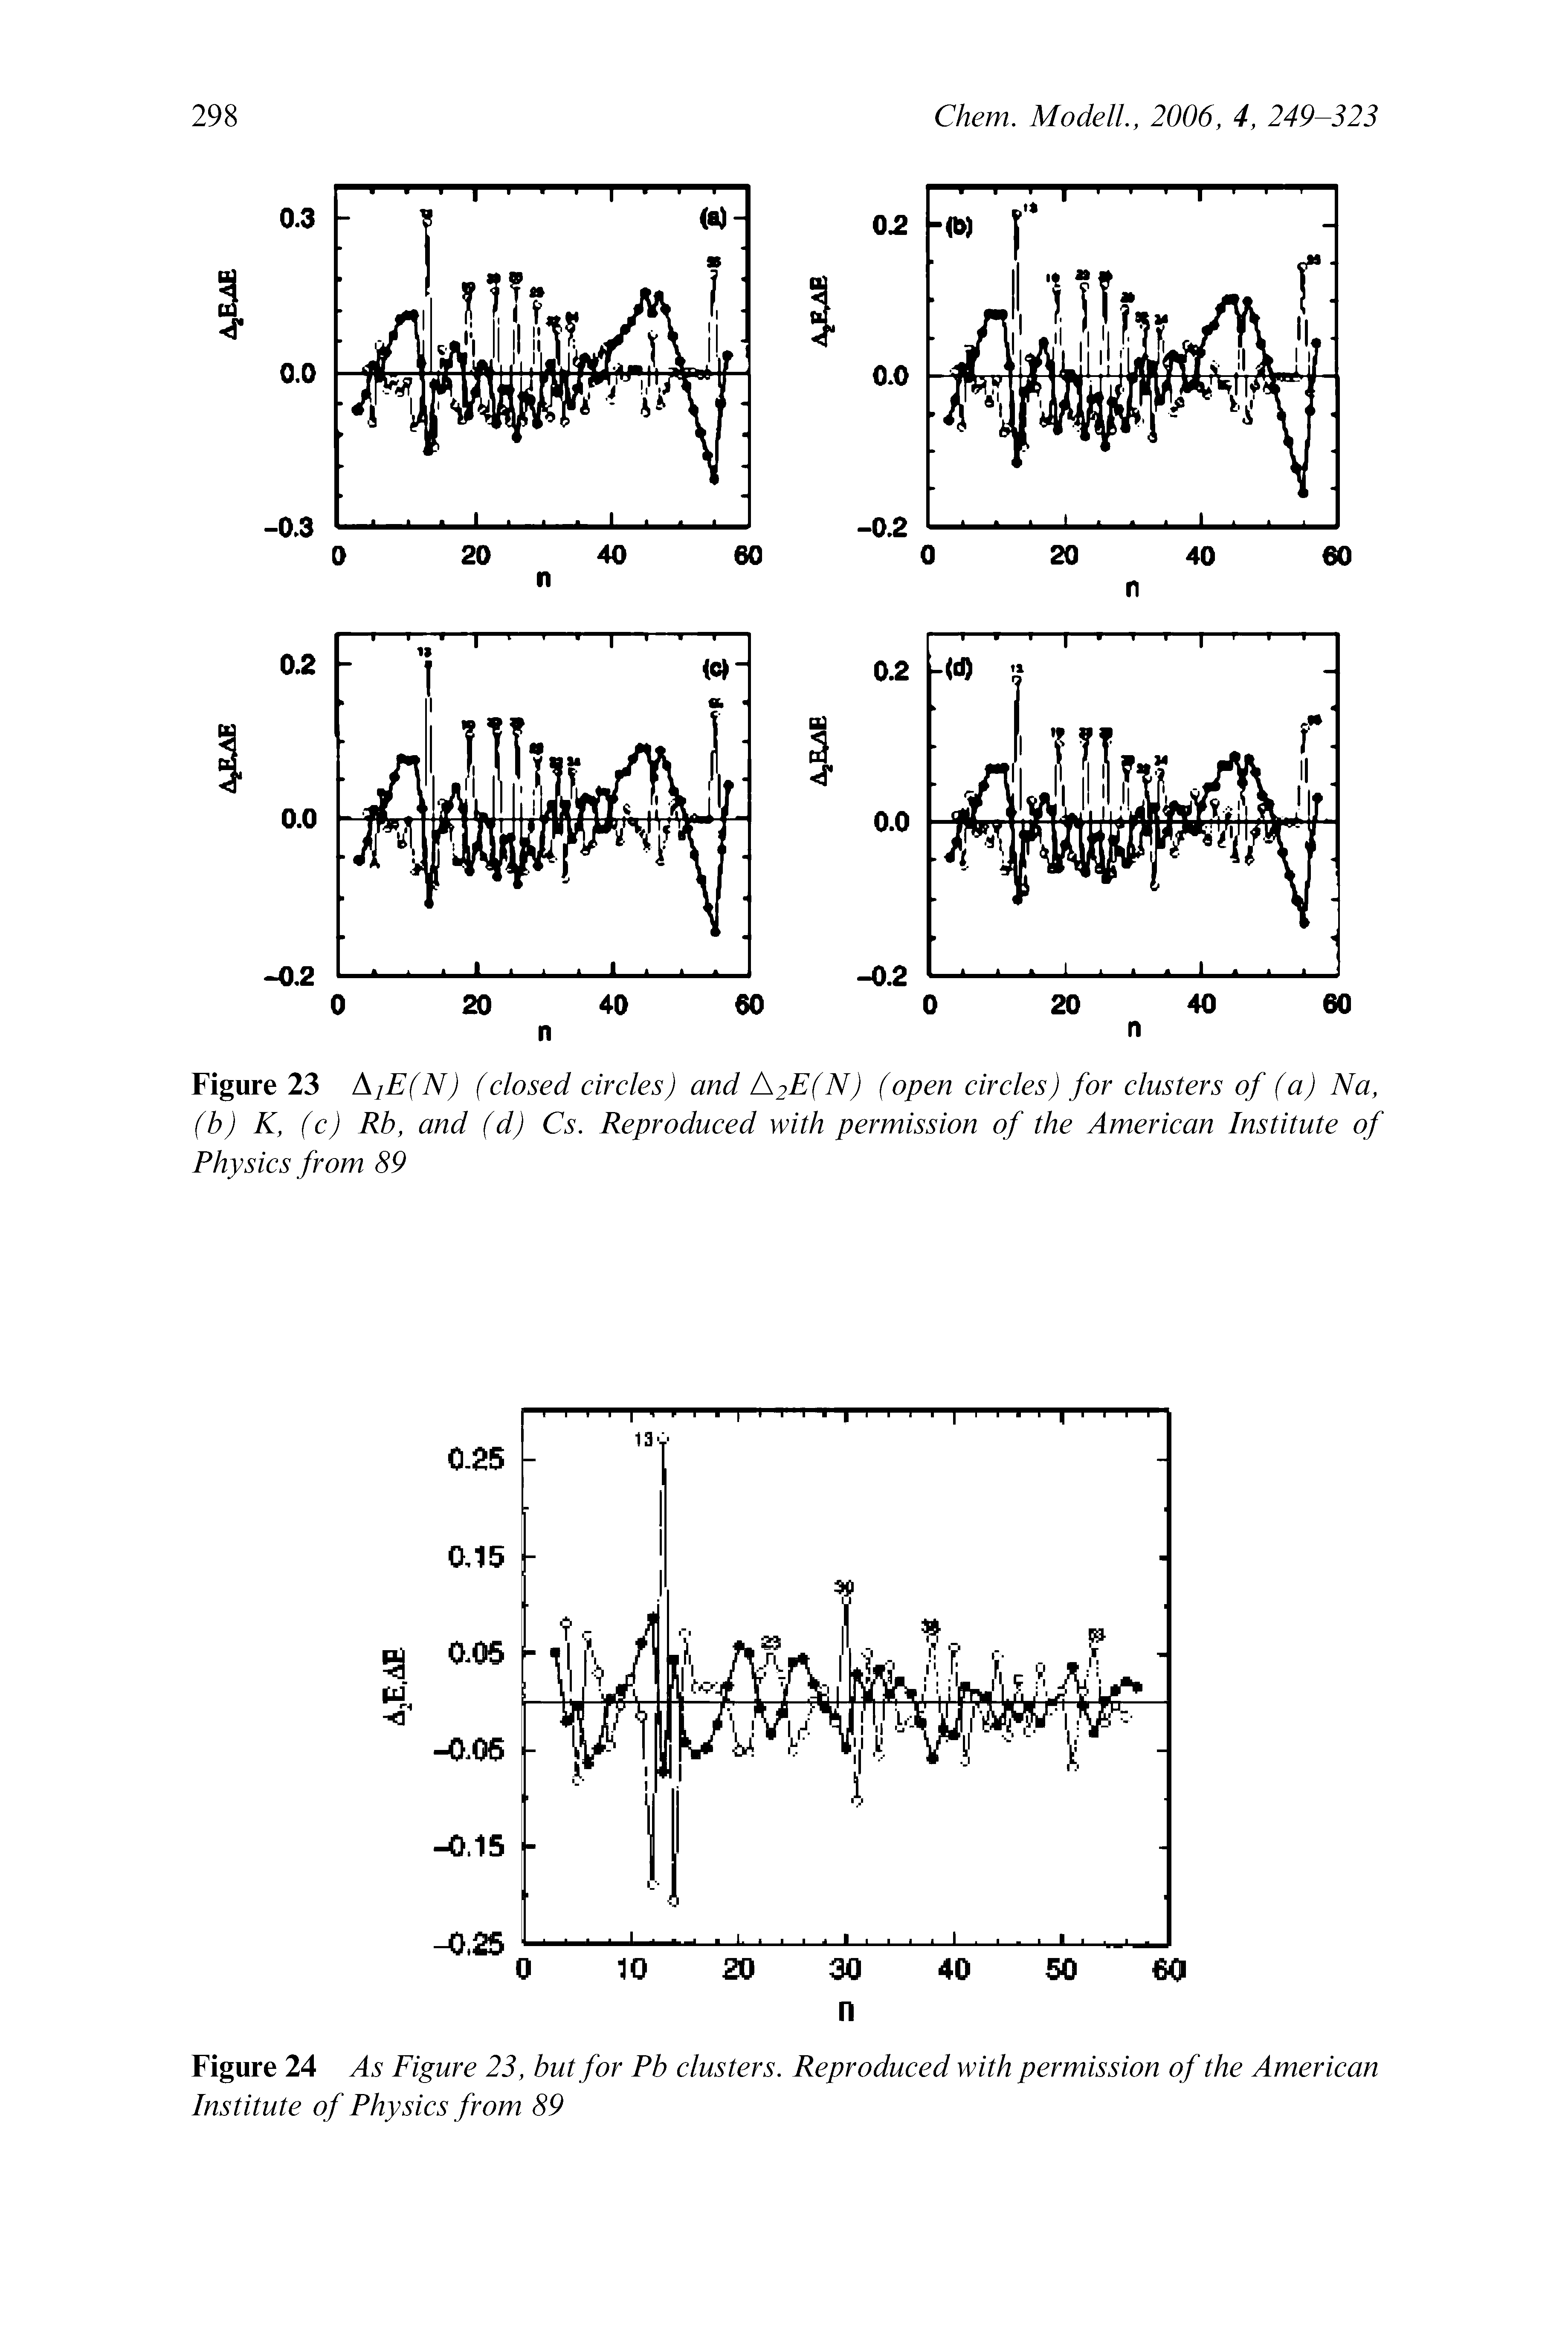 Figure 23 A]E(N) (closed circles) and A2E(N) (open circles) for clusters of (a) Na, (b) K, (c) Rb, and (d) Cs. Reproduced with permission of the American Institute of Physics from 89...